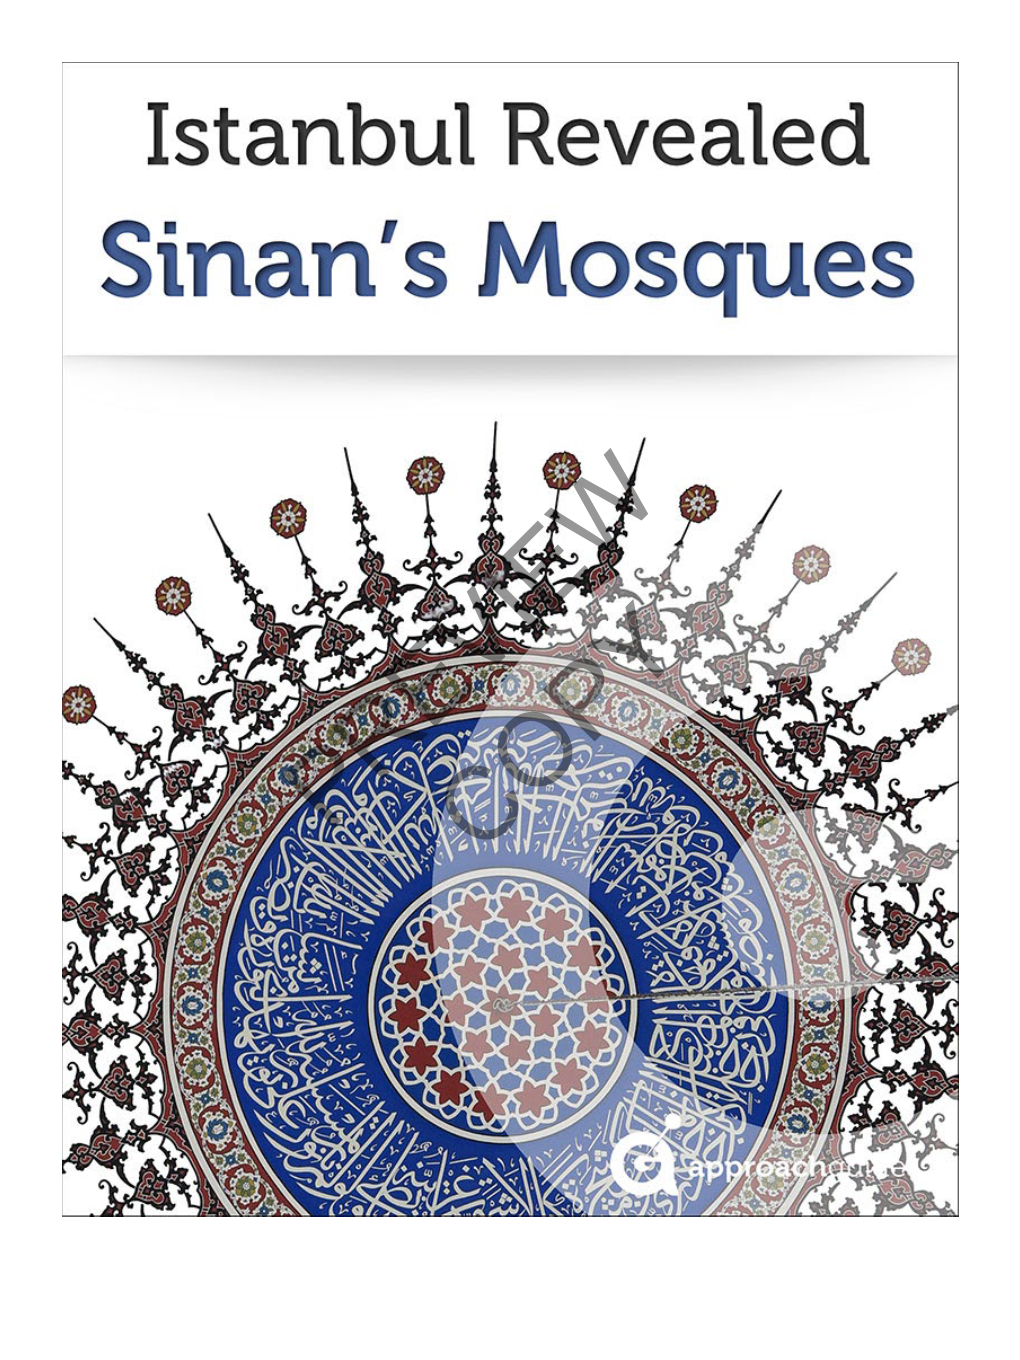 Sinan's Mosques